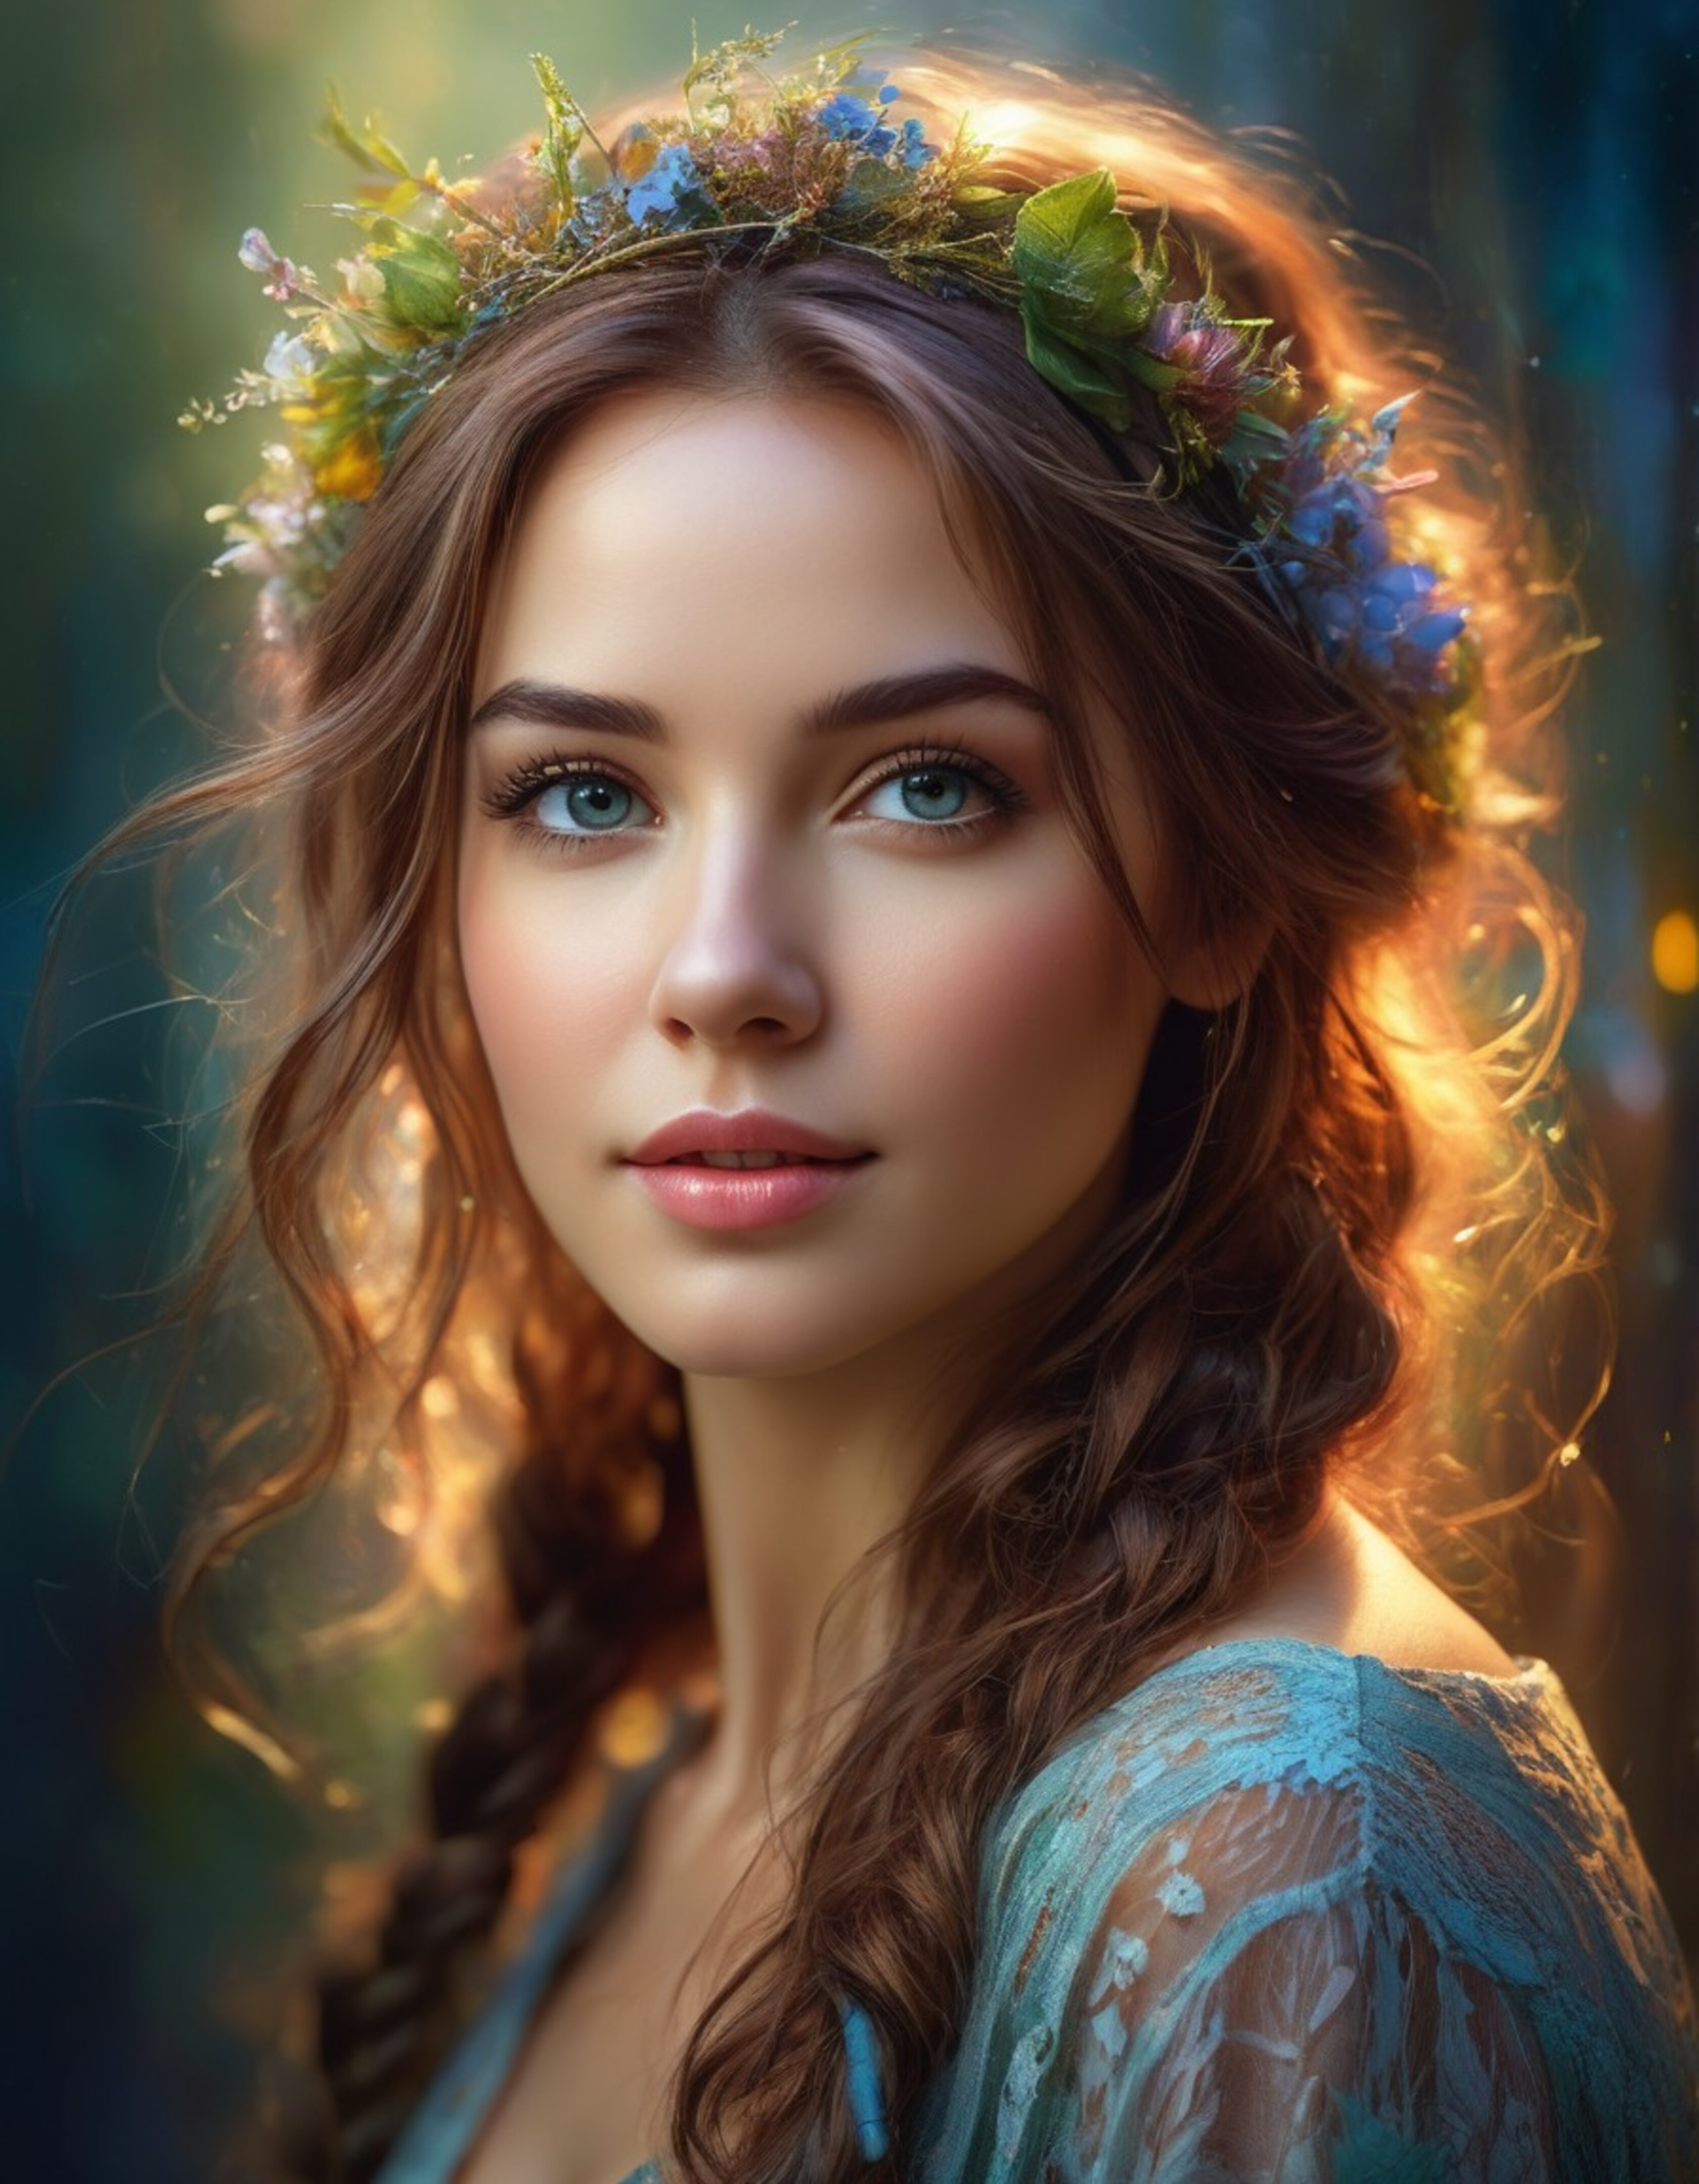 Free photo Portrait of a girl with flowers in her hair